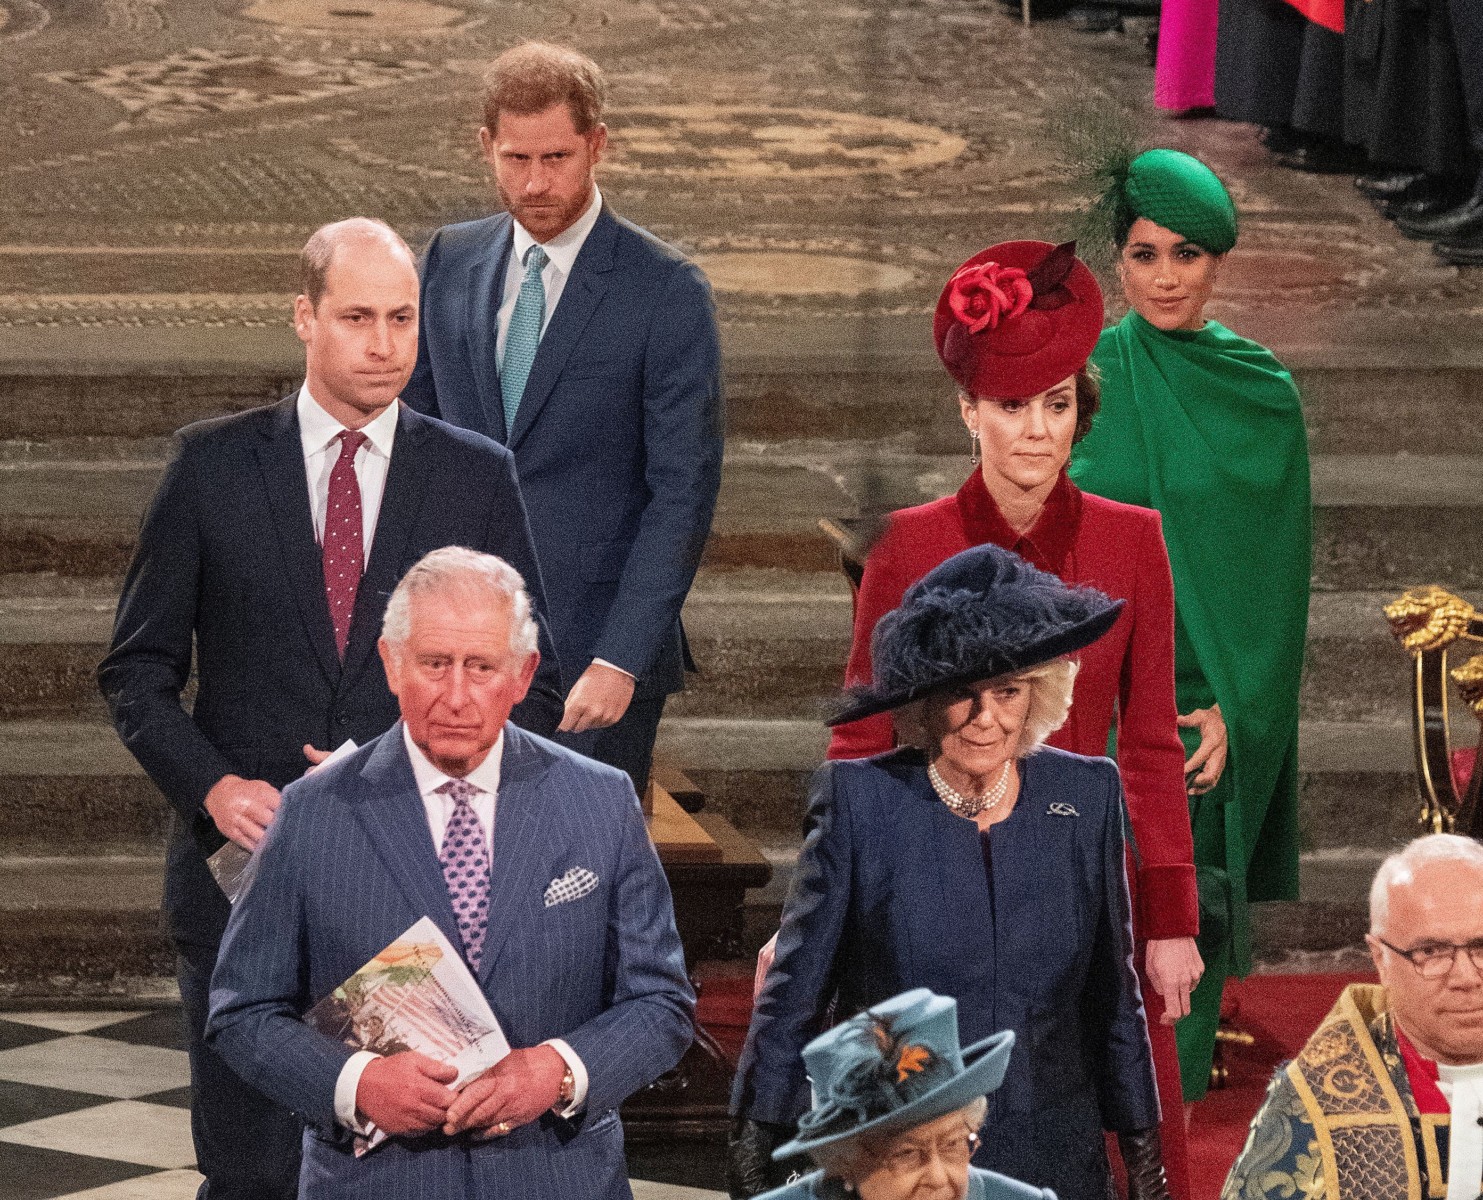 Prince Harry and Meghan Markle were behind Prince William and Kate during today's ceremony